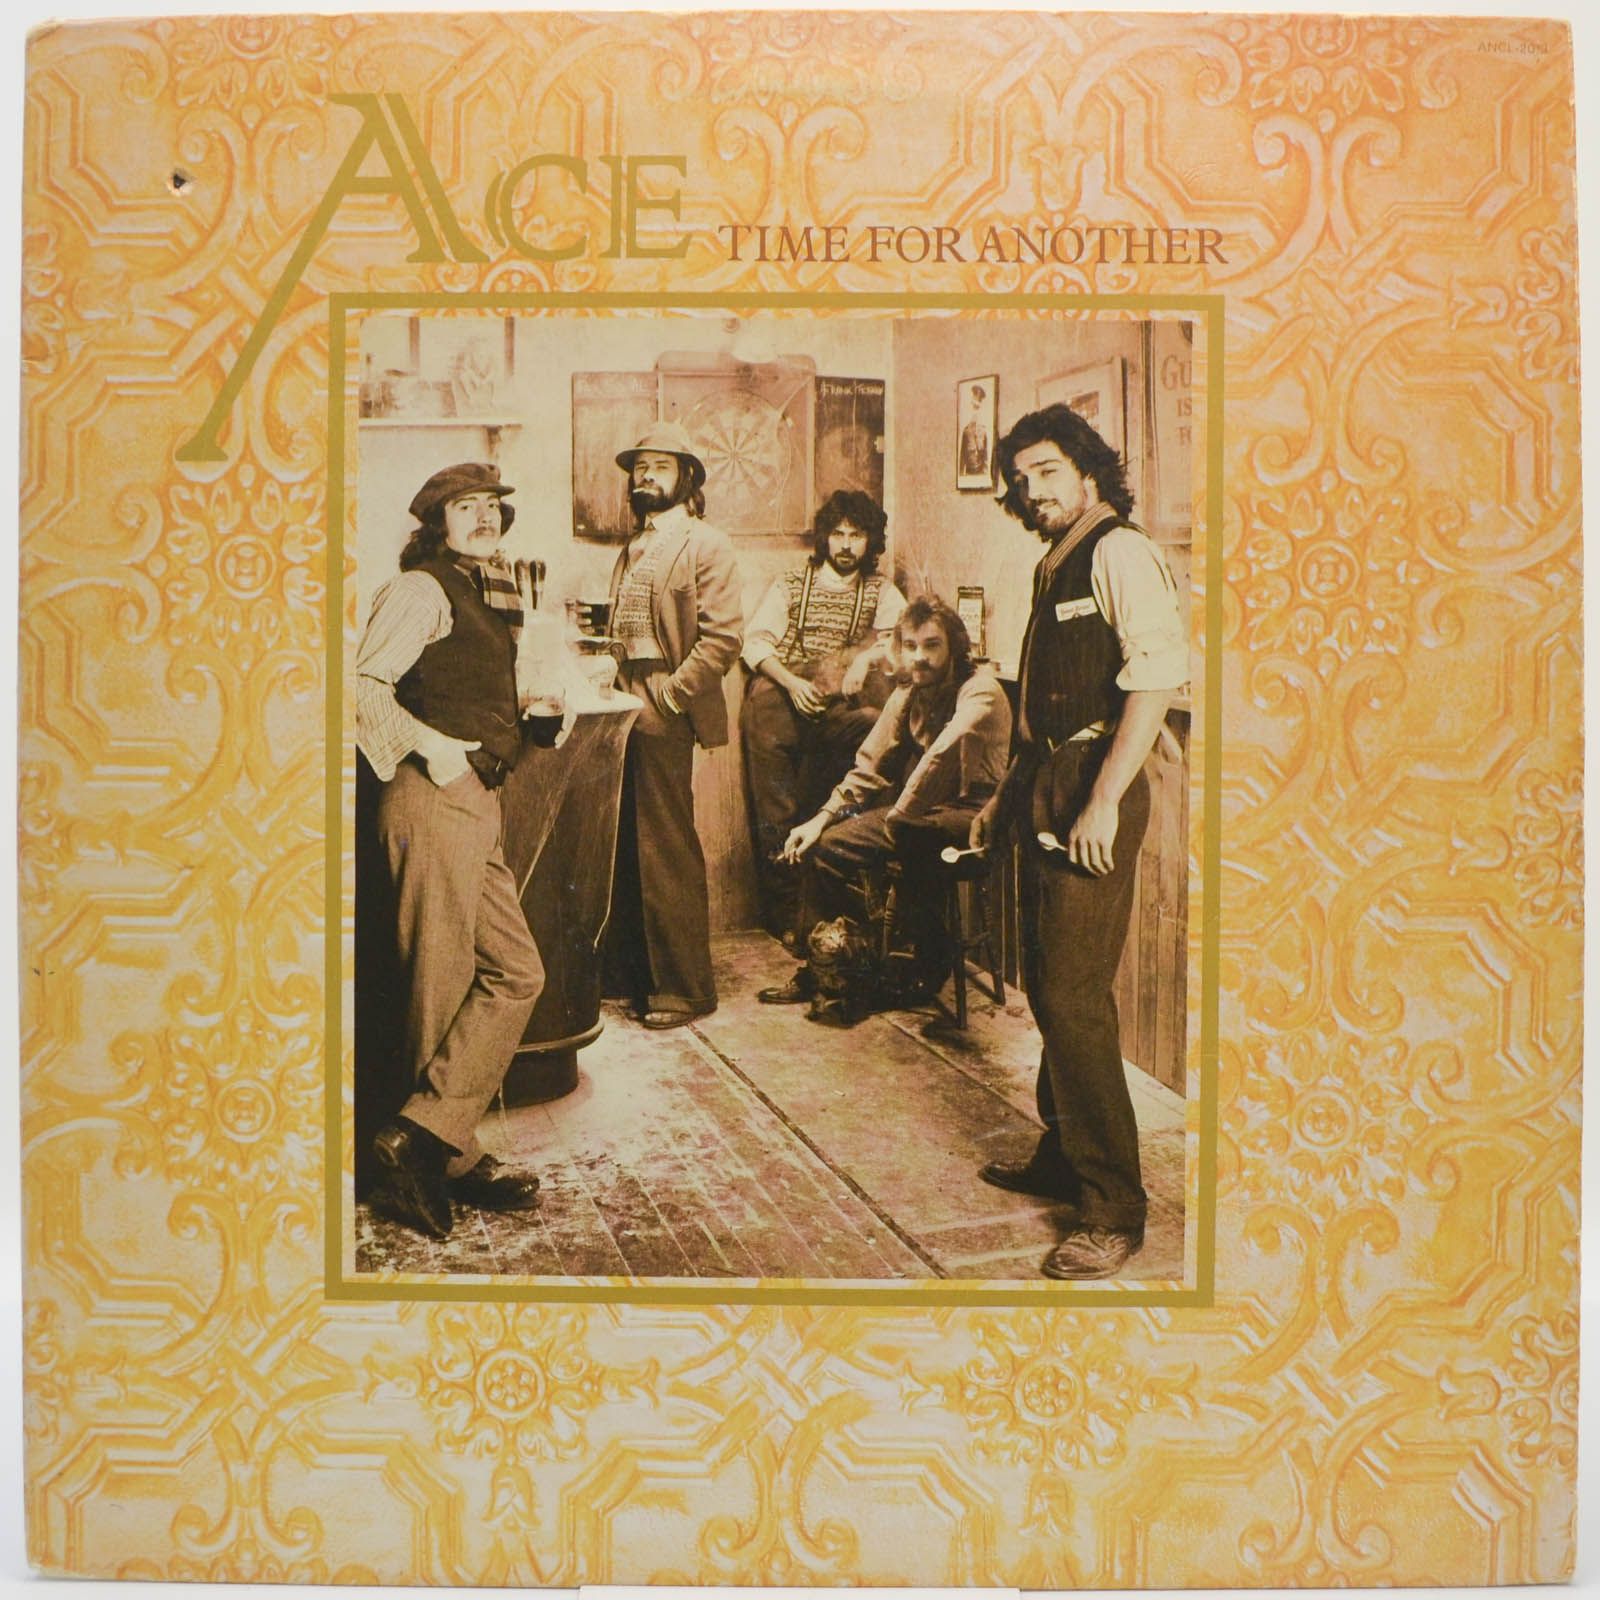 Ace — Time For Another (USA), 1975